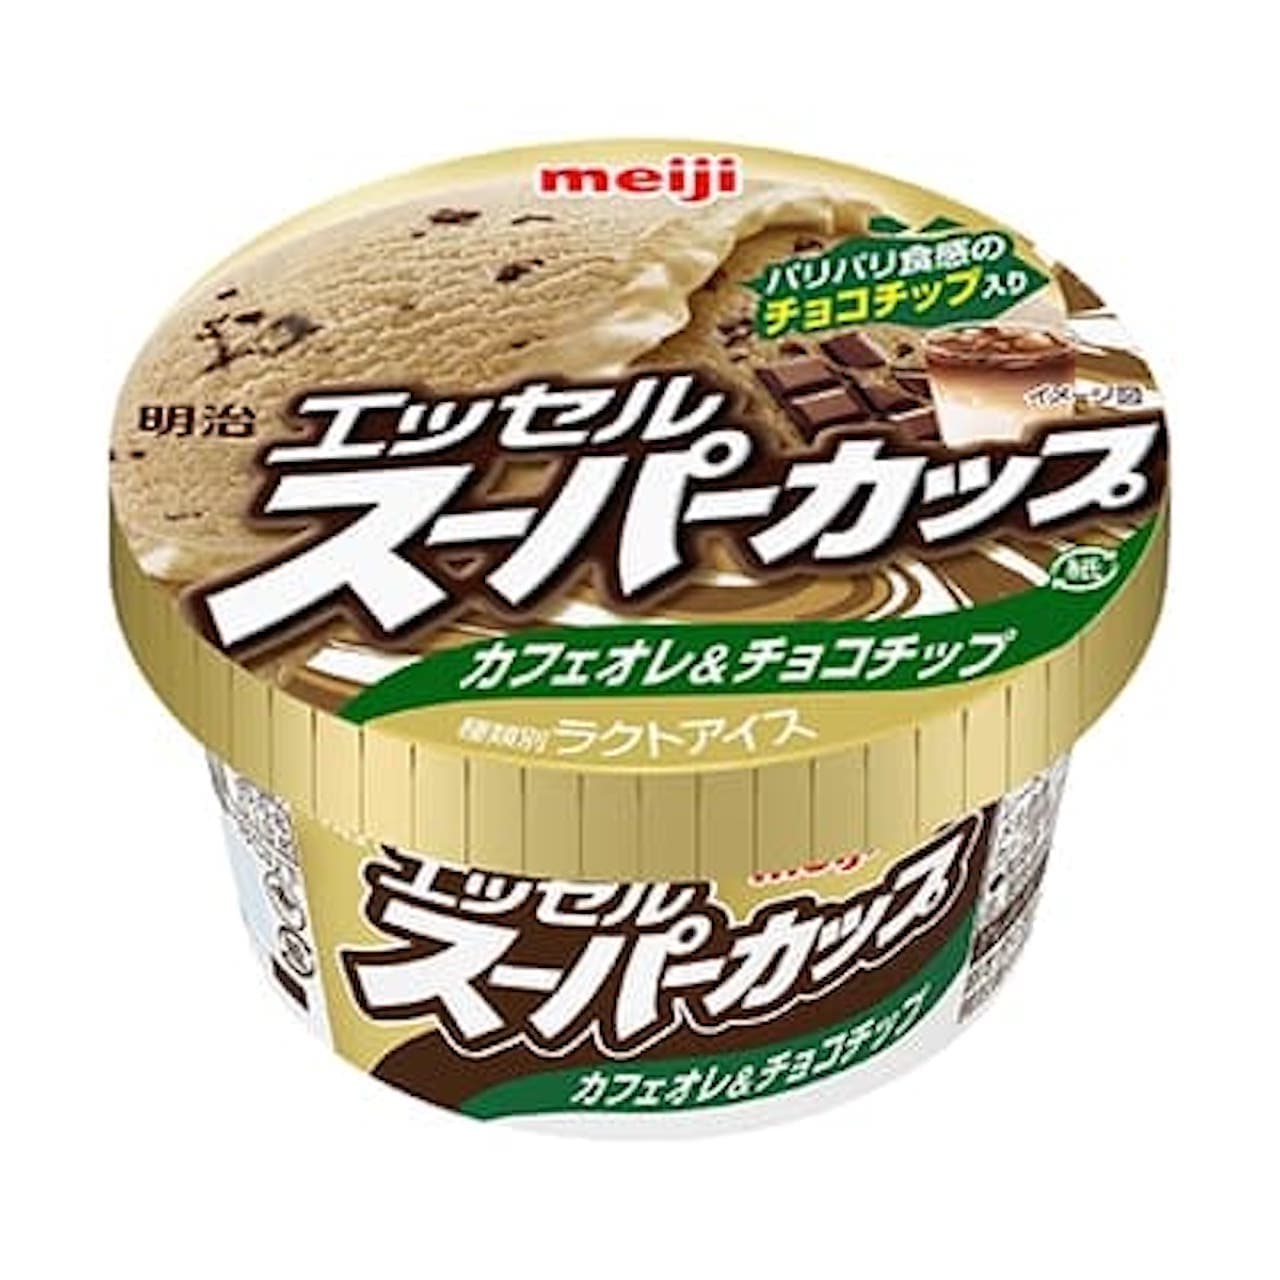 New product "Meiji Essel Super Cup Cafe au lait & chocolate chips"